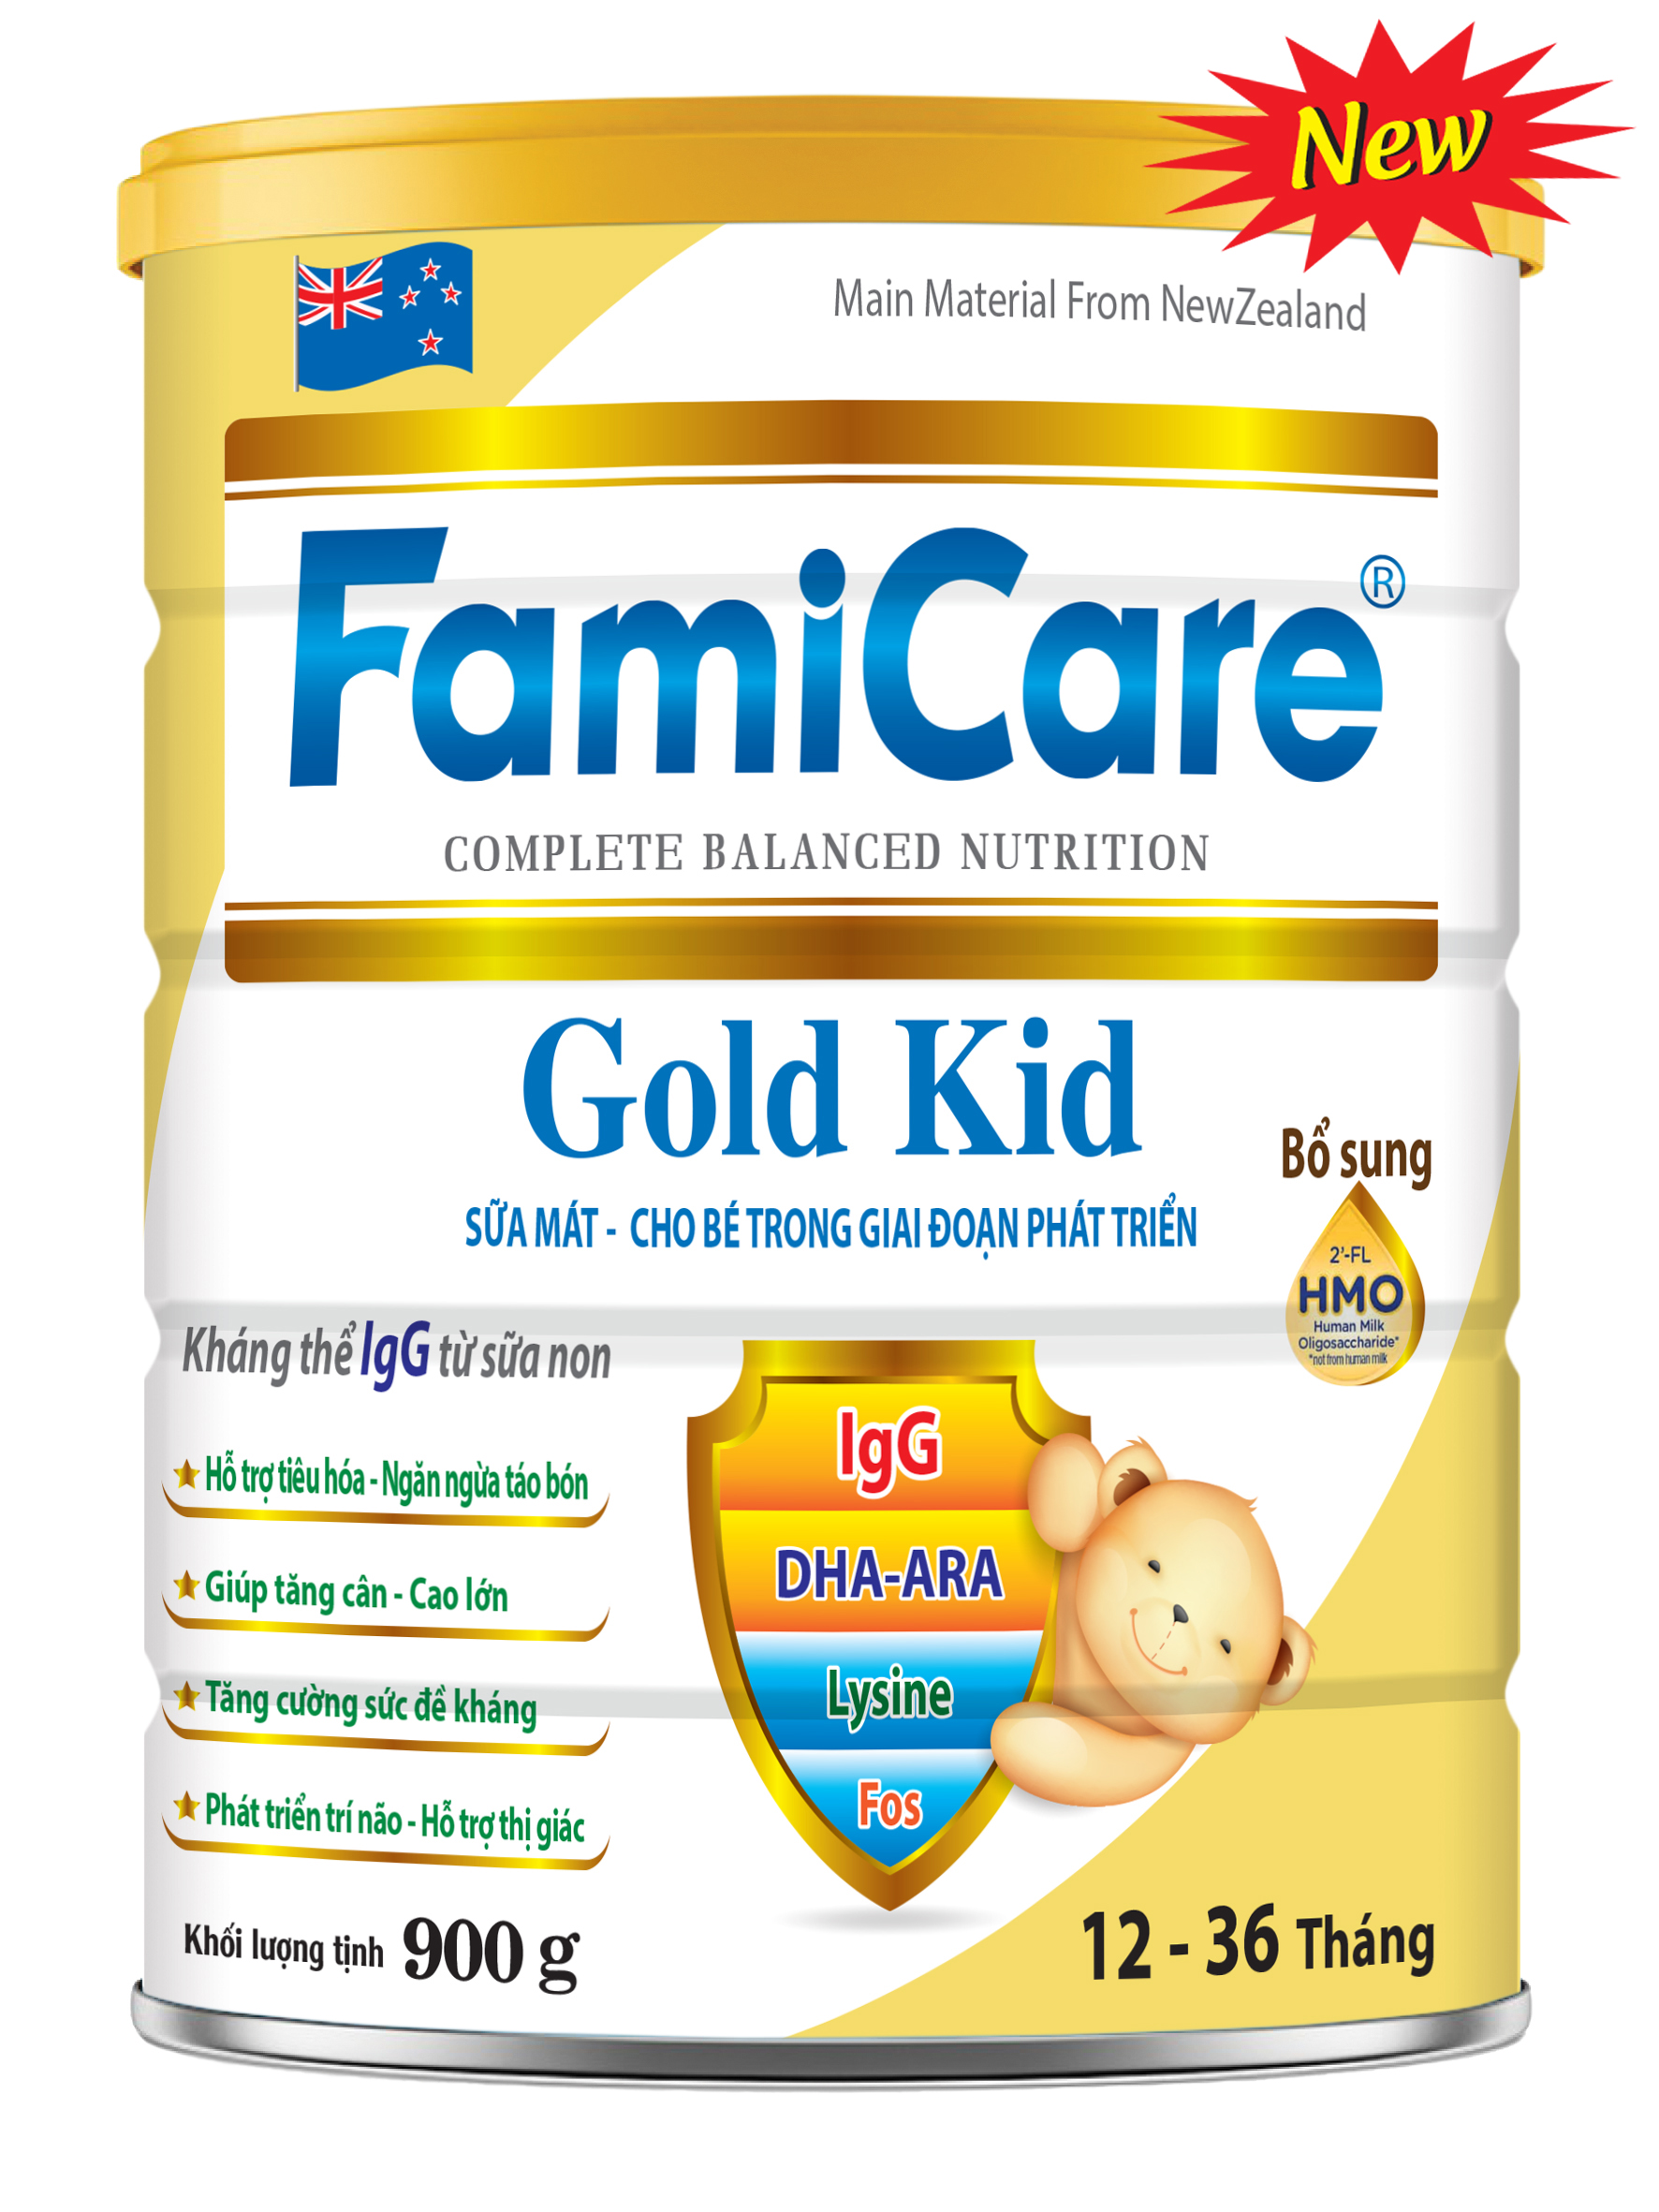 FamiCare Gold Kid (New)